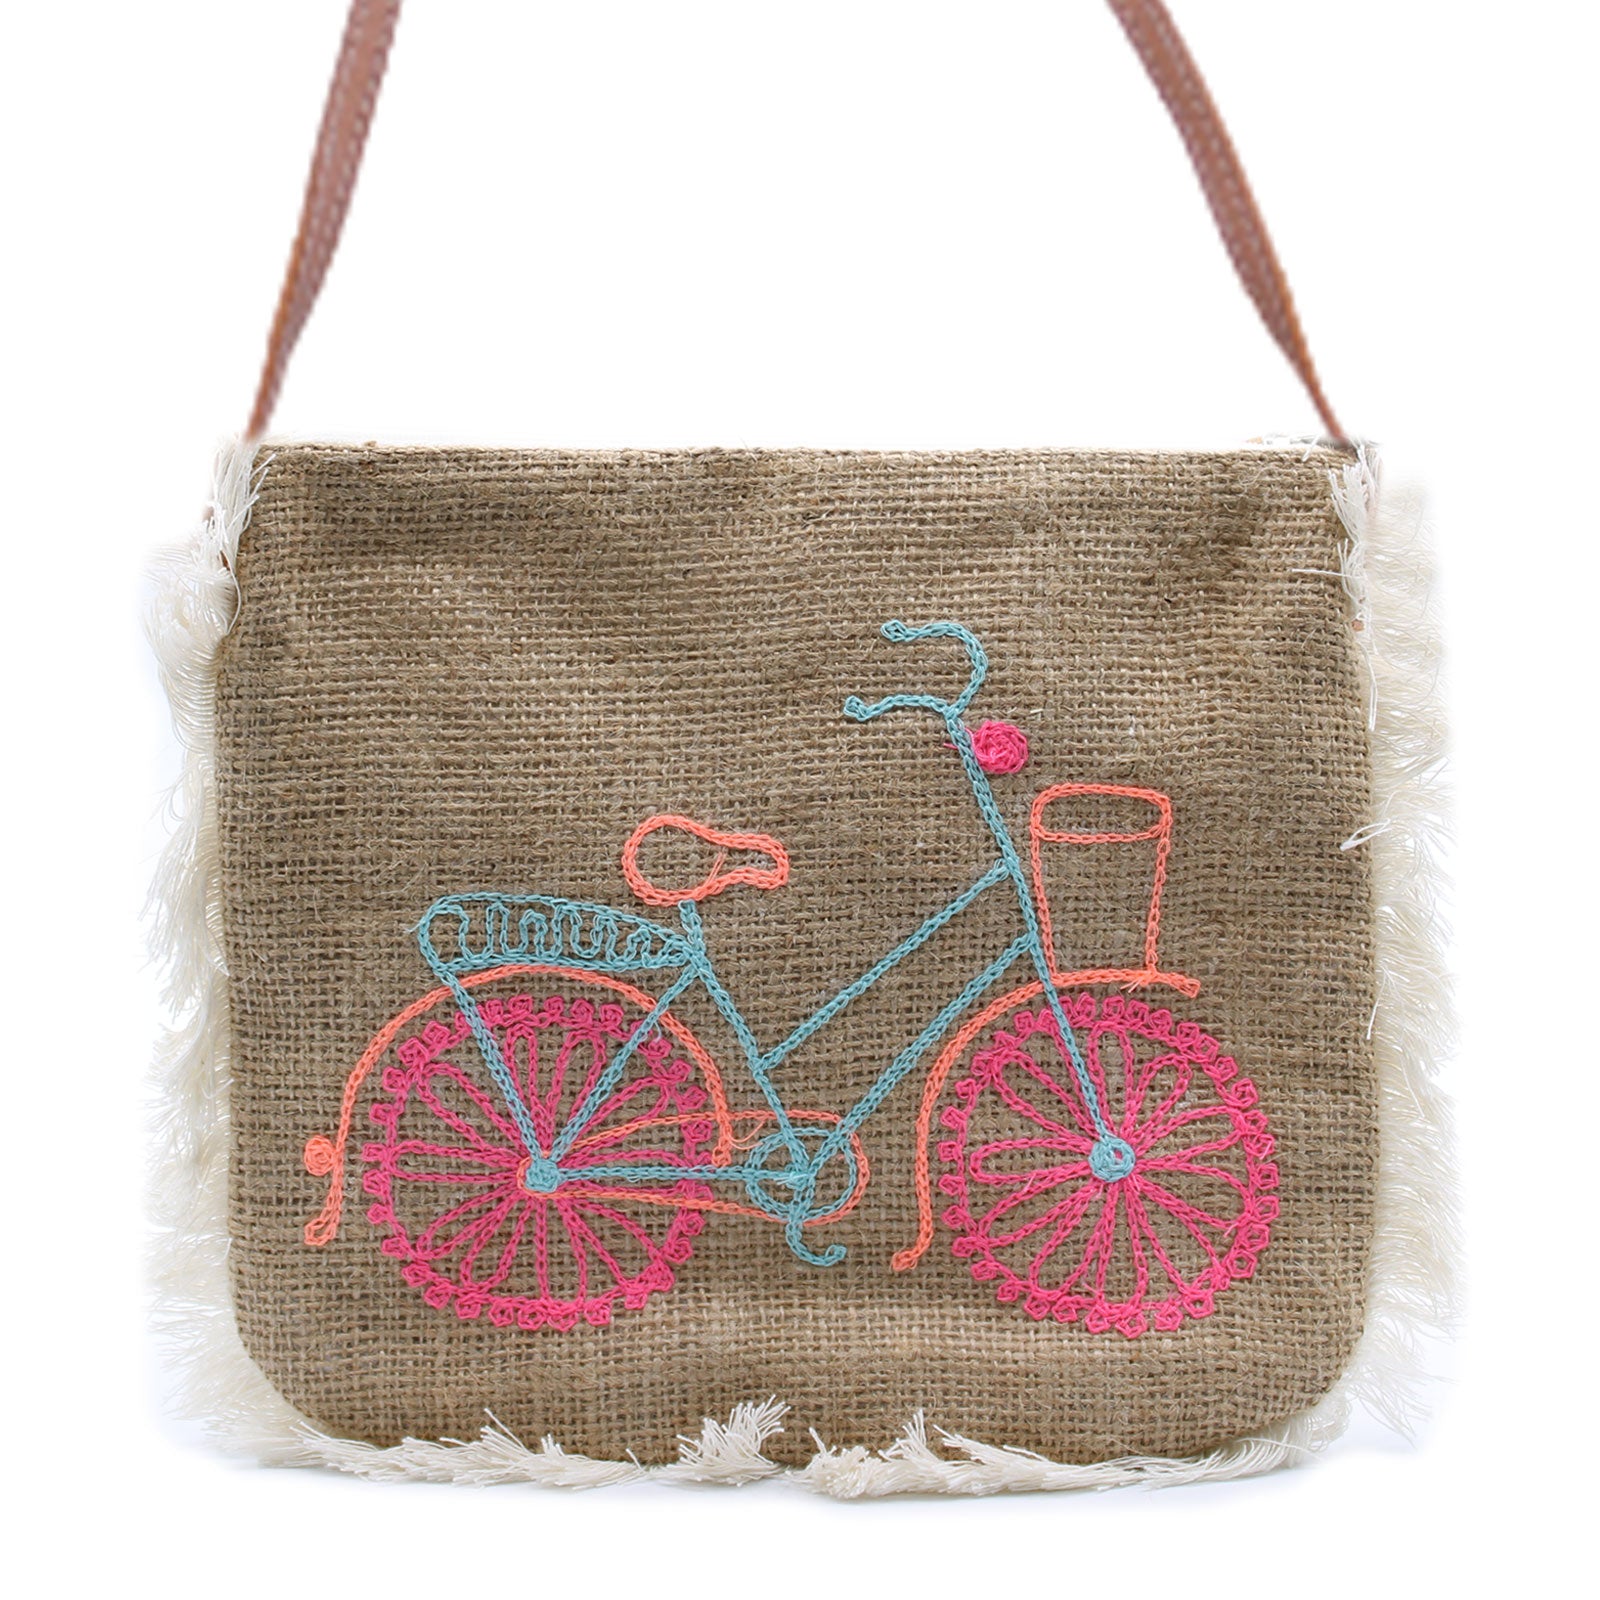 View Fab Fringe Bag Bicycle Embroidery information